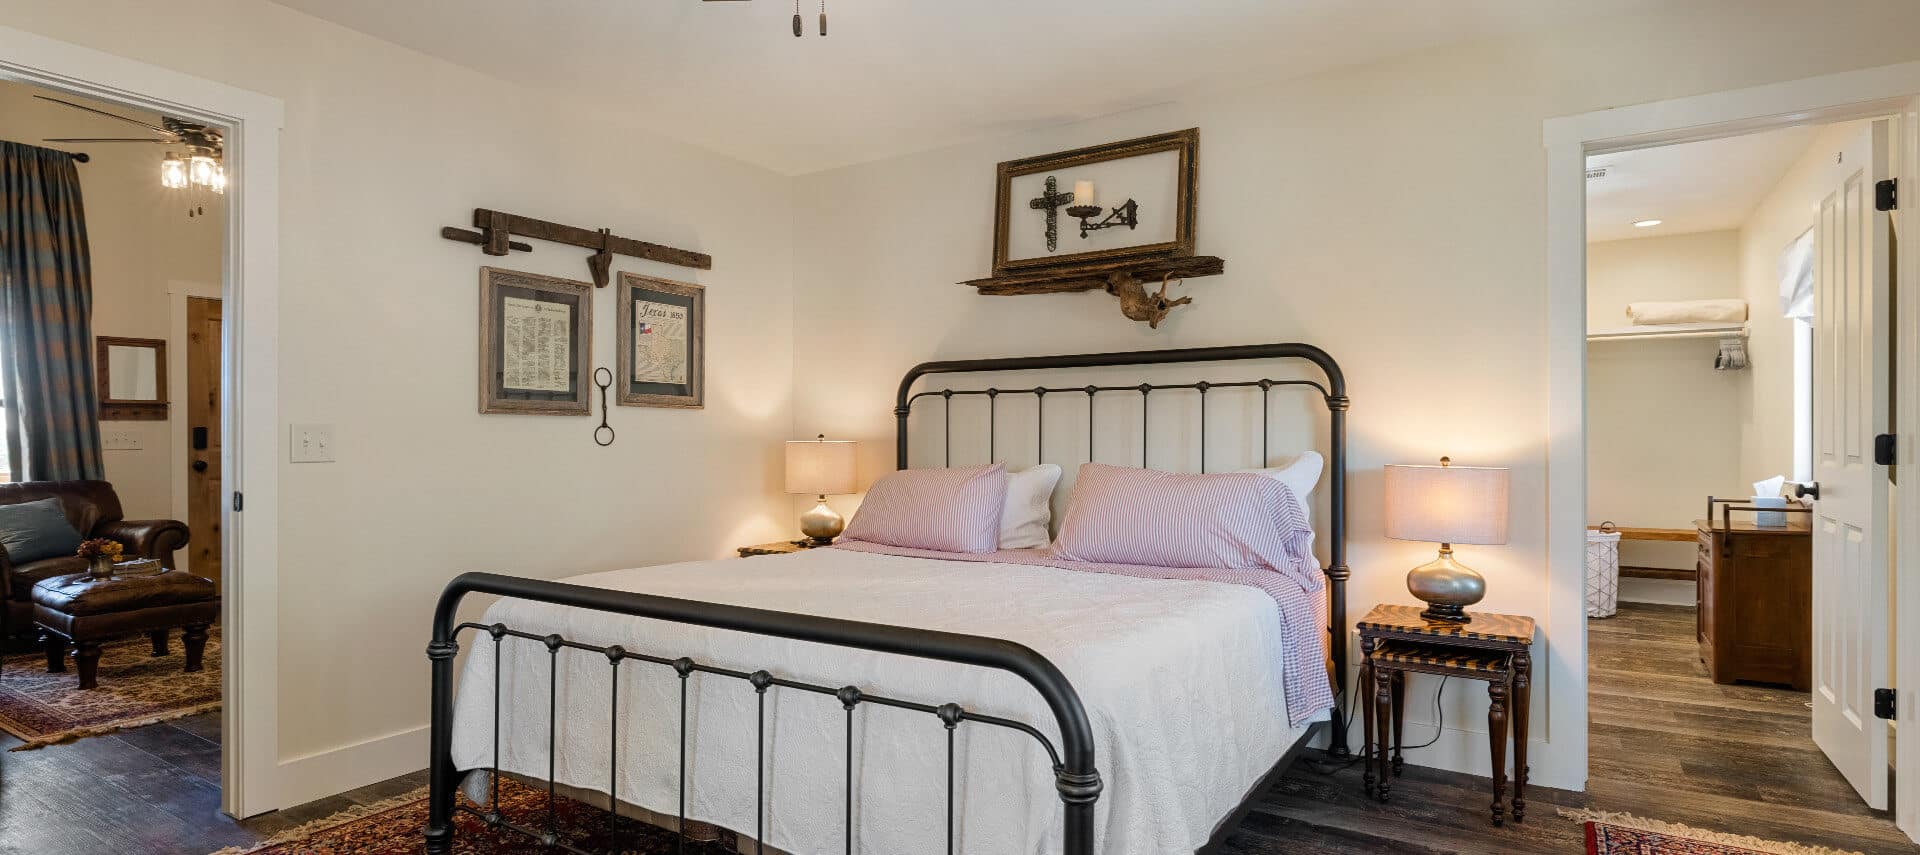 Wrought iron bed in center room with cream walls with framed pictures on 2 walls and nightstand, wood floors with 2 connected rooms on each side.